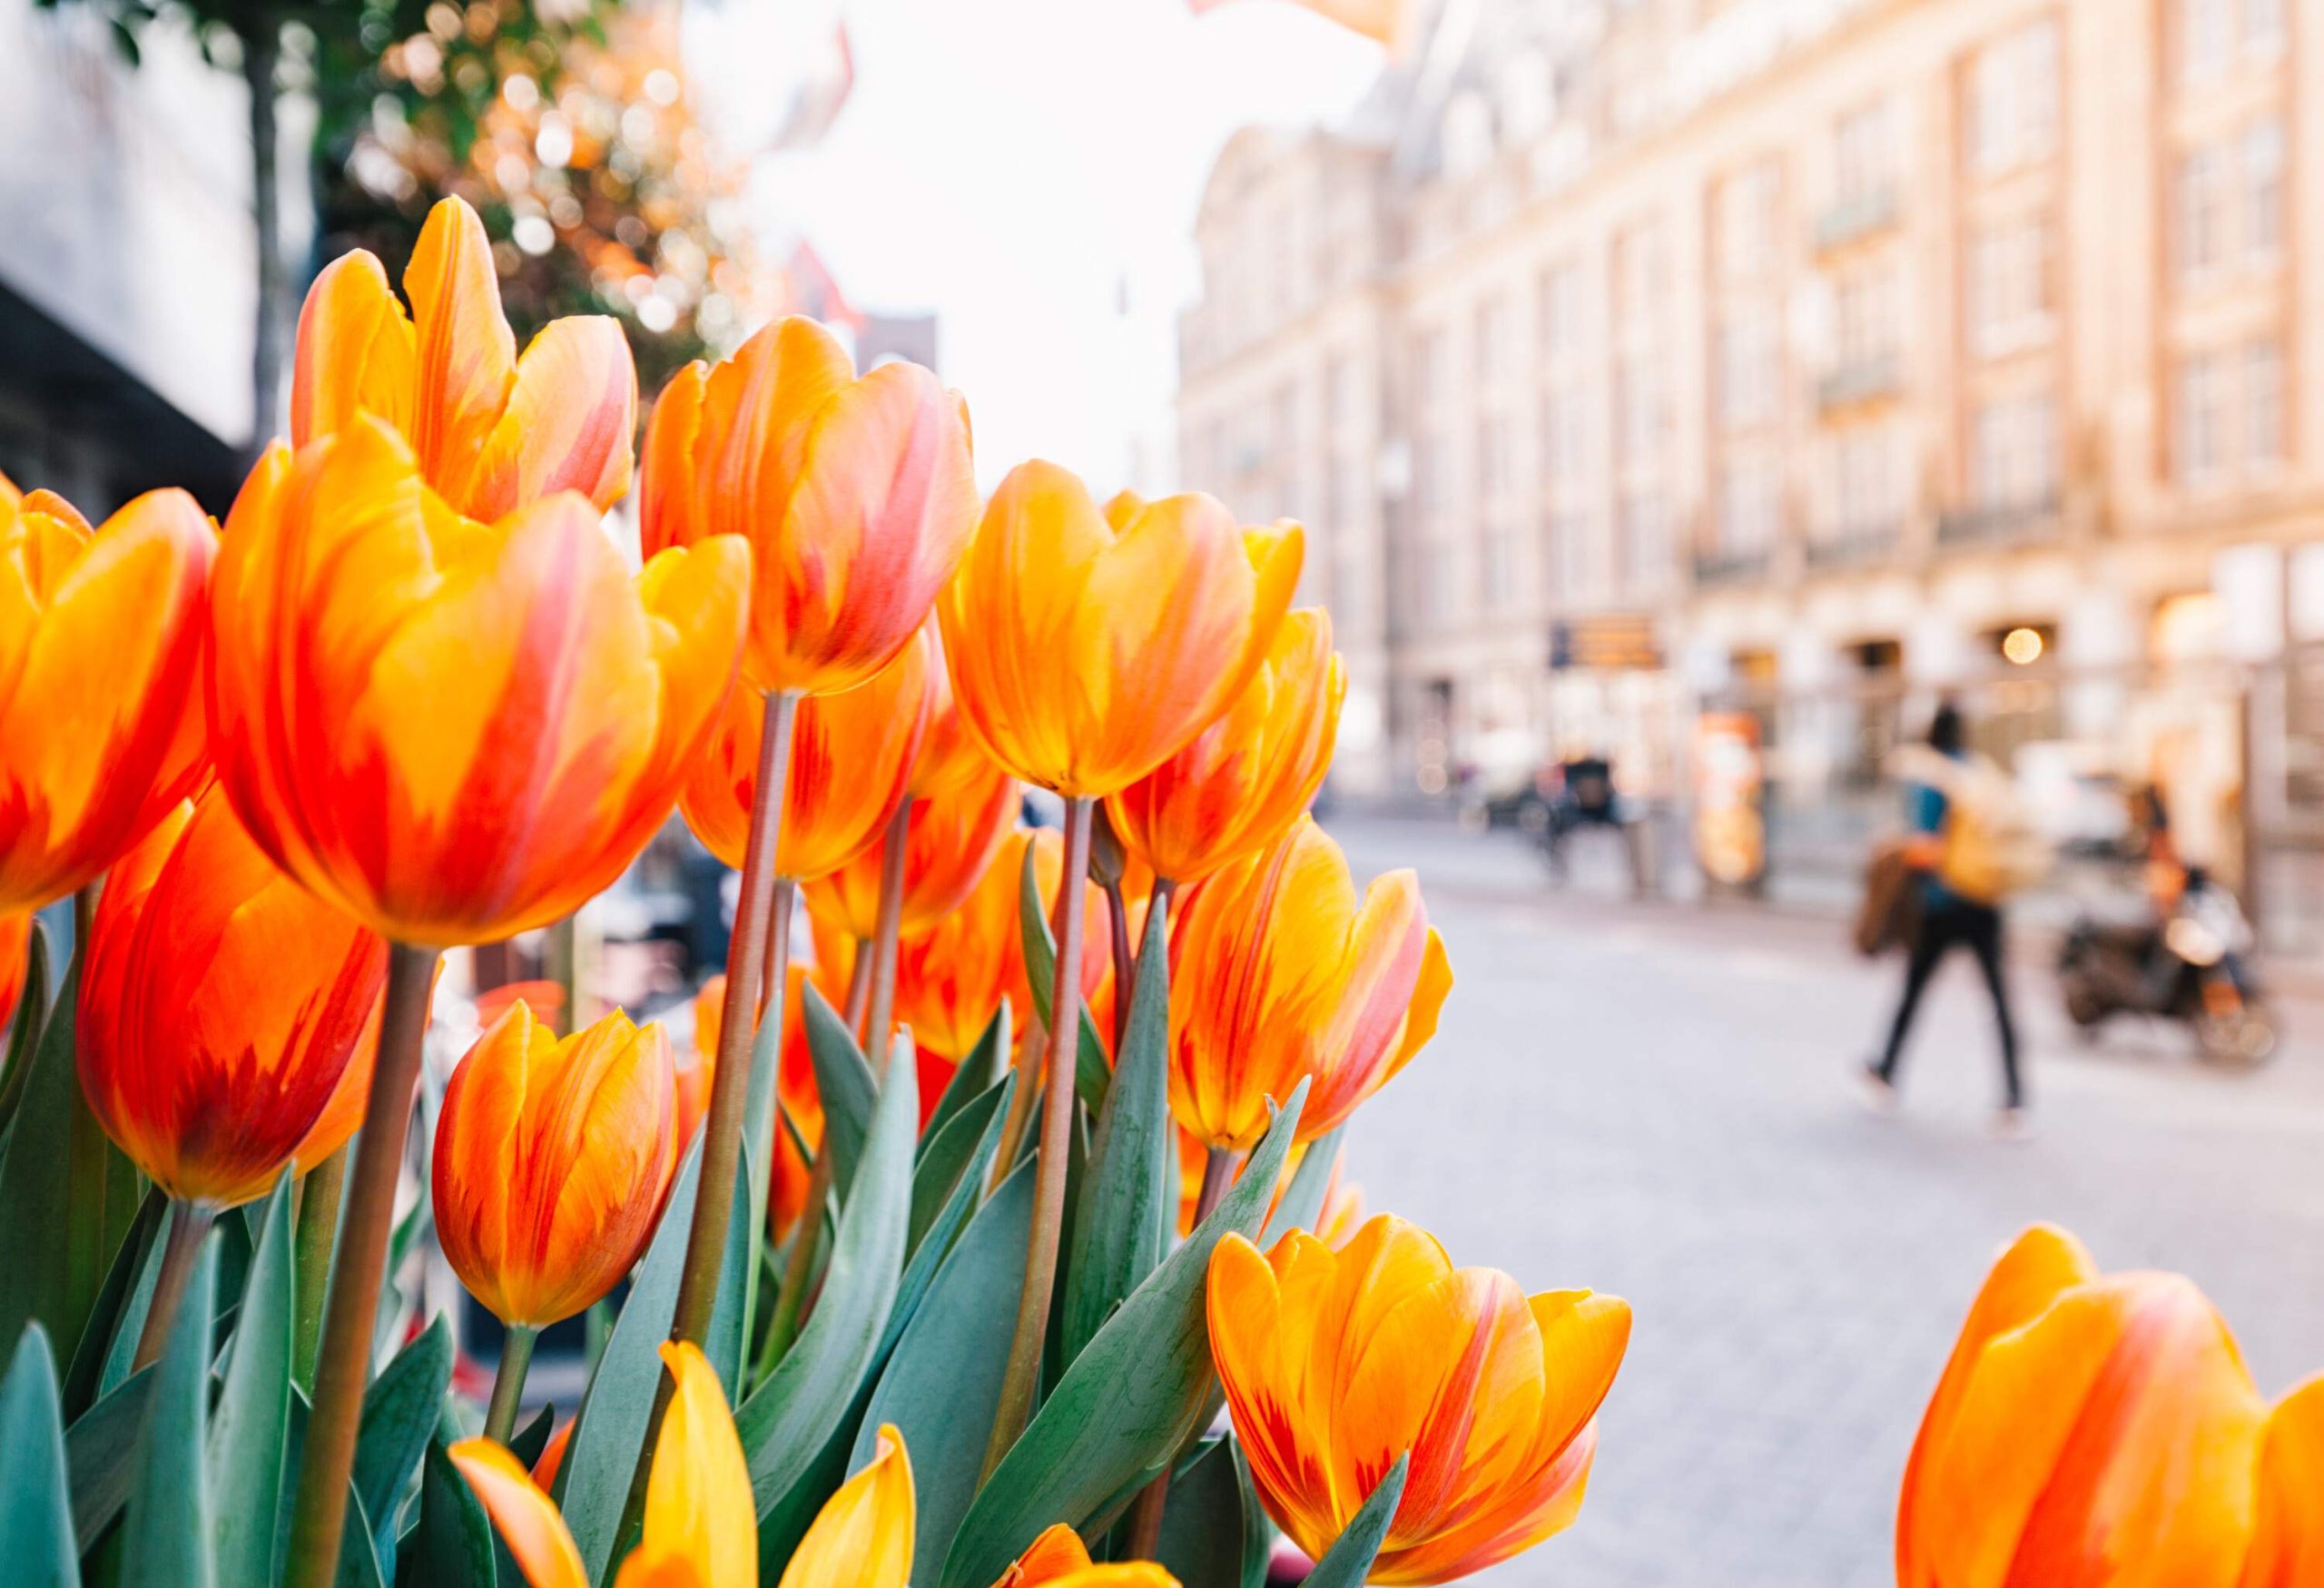 Beautiful tulips in deep orange hues in the foreground and buildings across the street in the background.